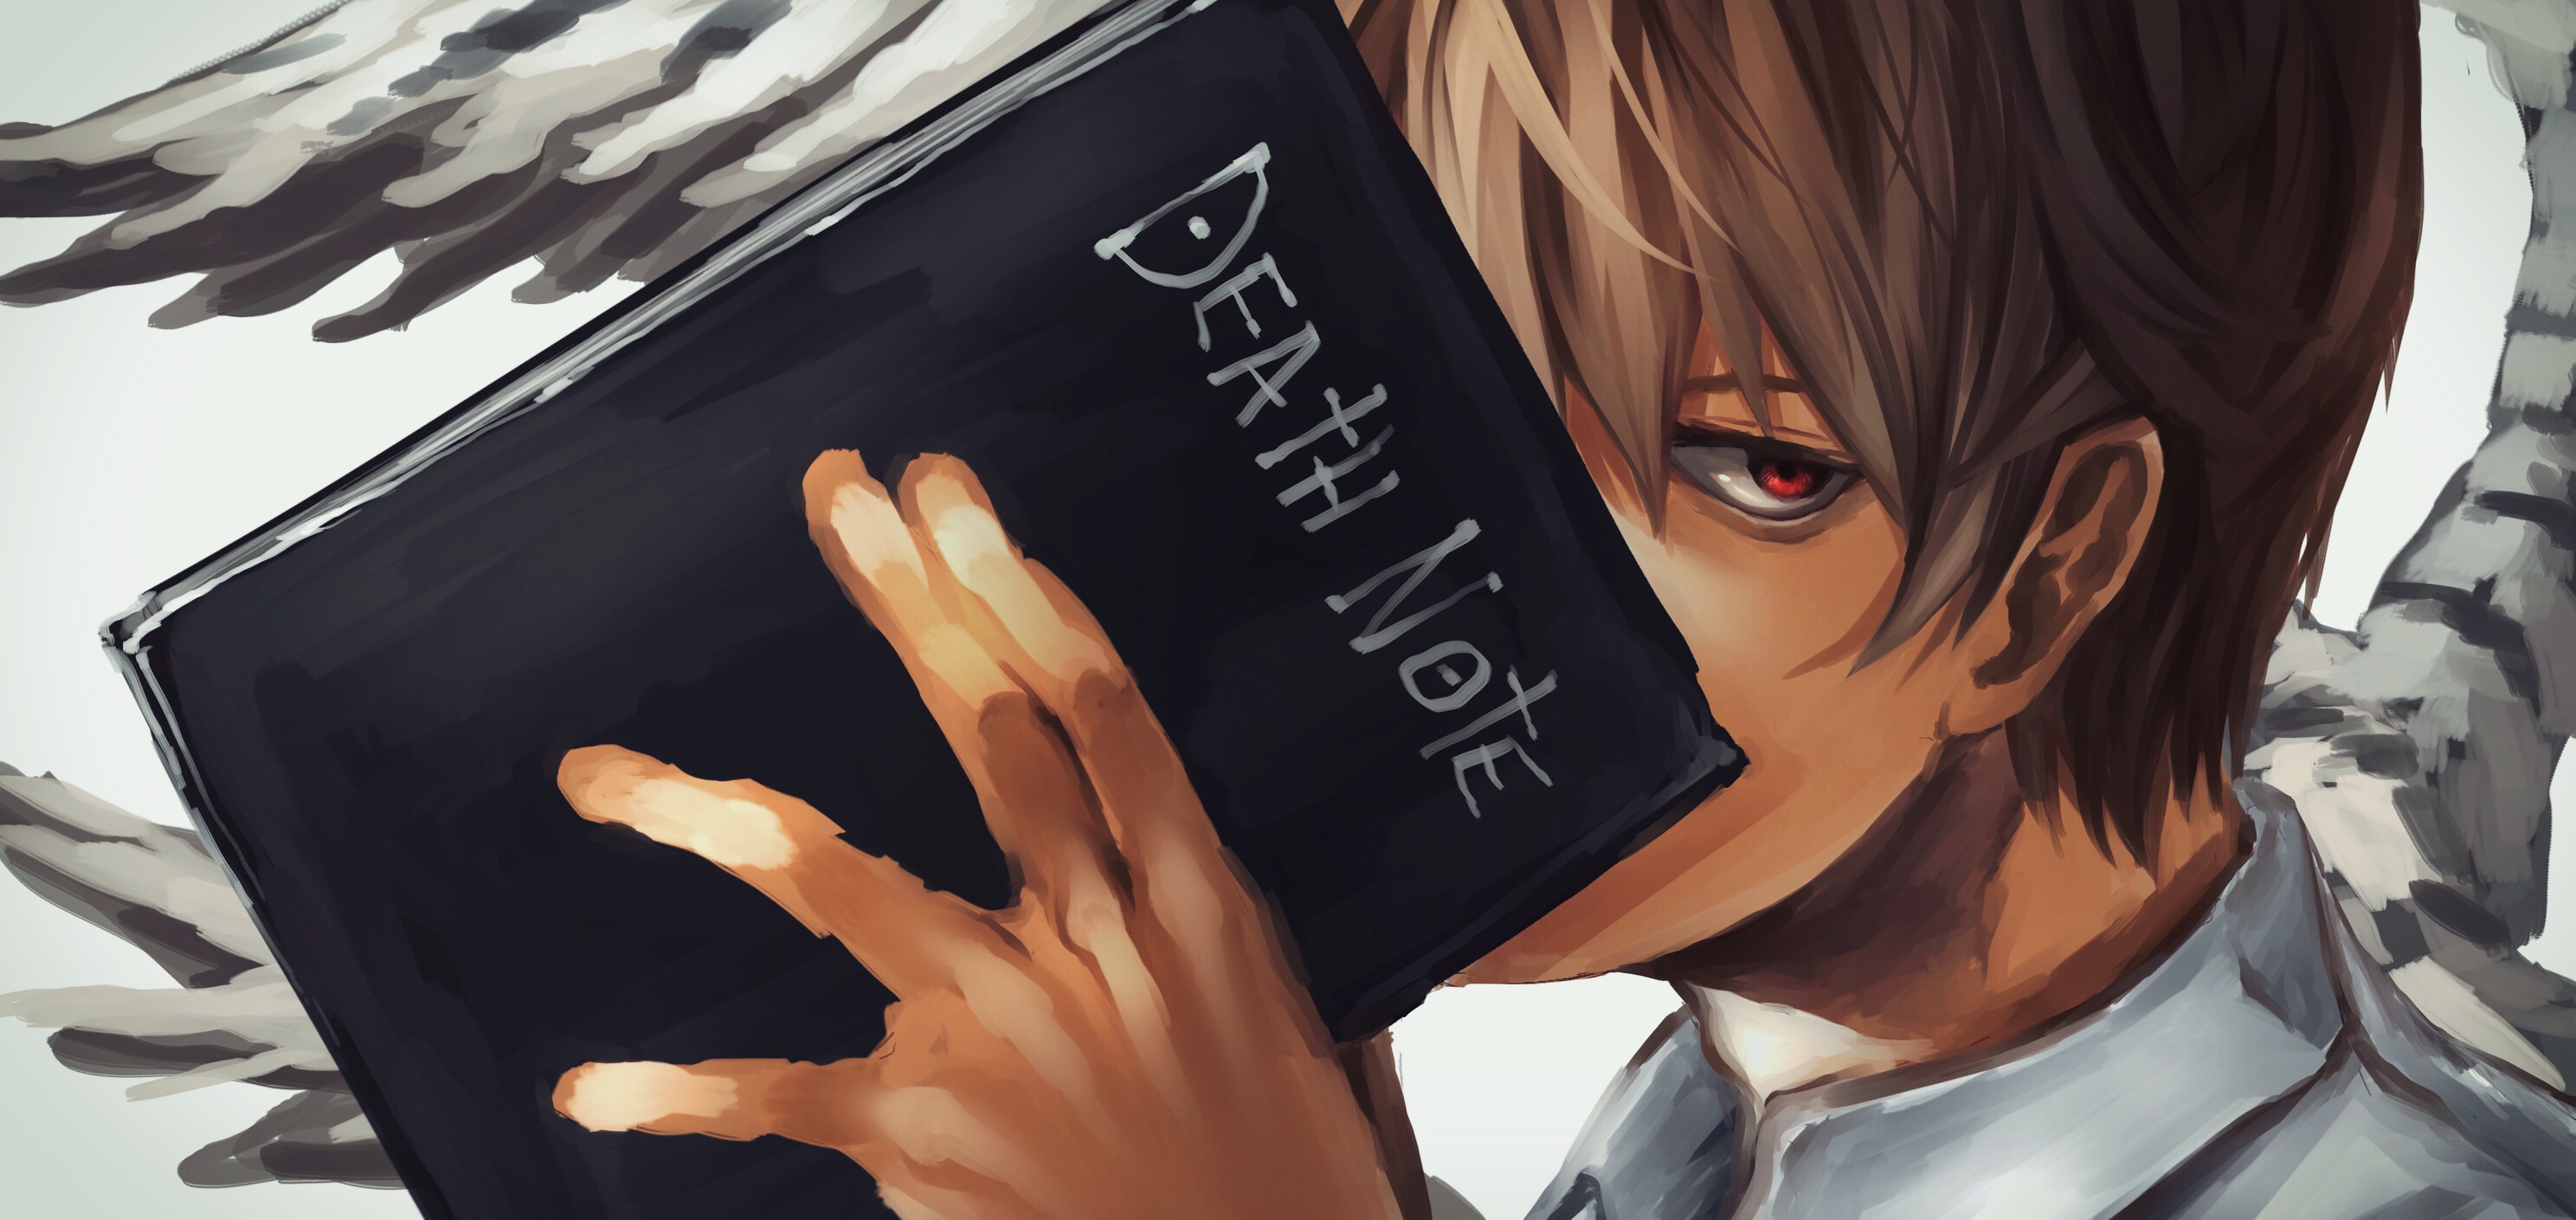 Anime Death Note HD Wallpaper by IO